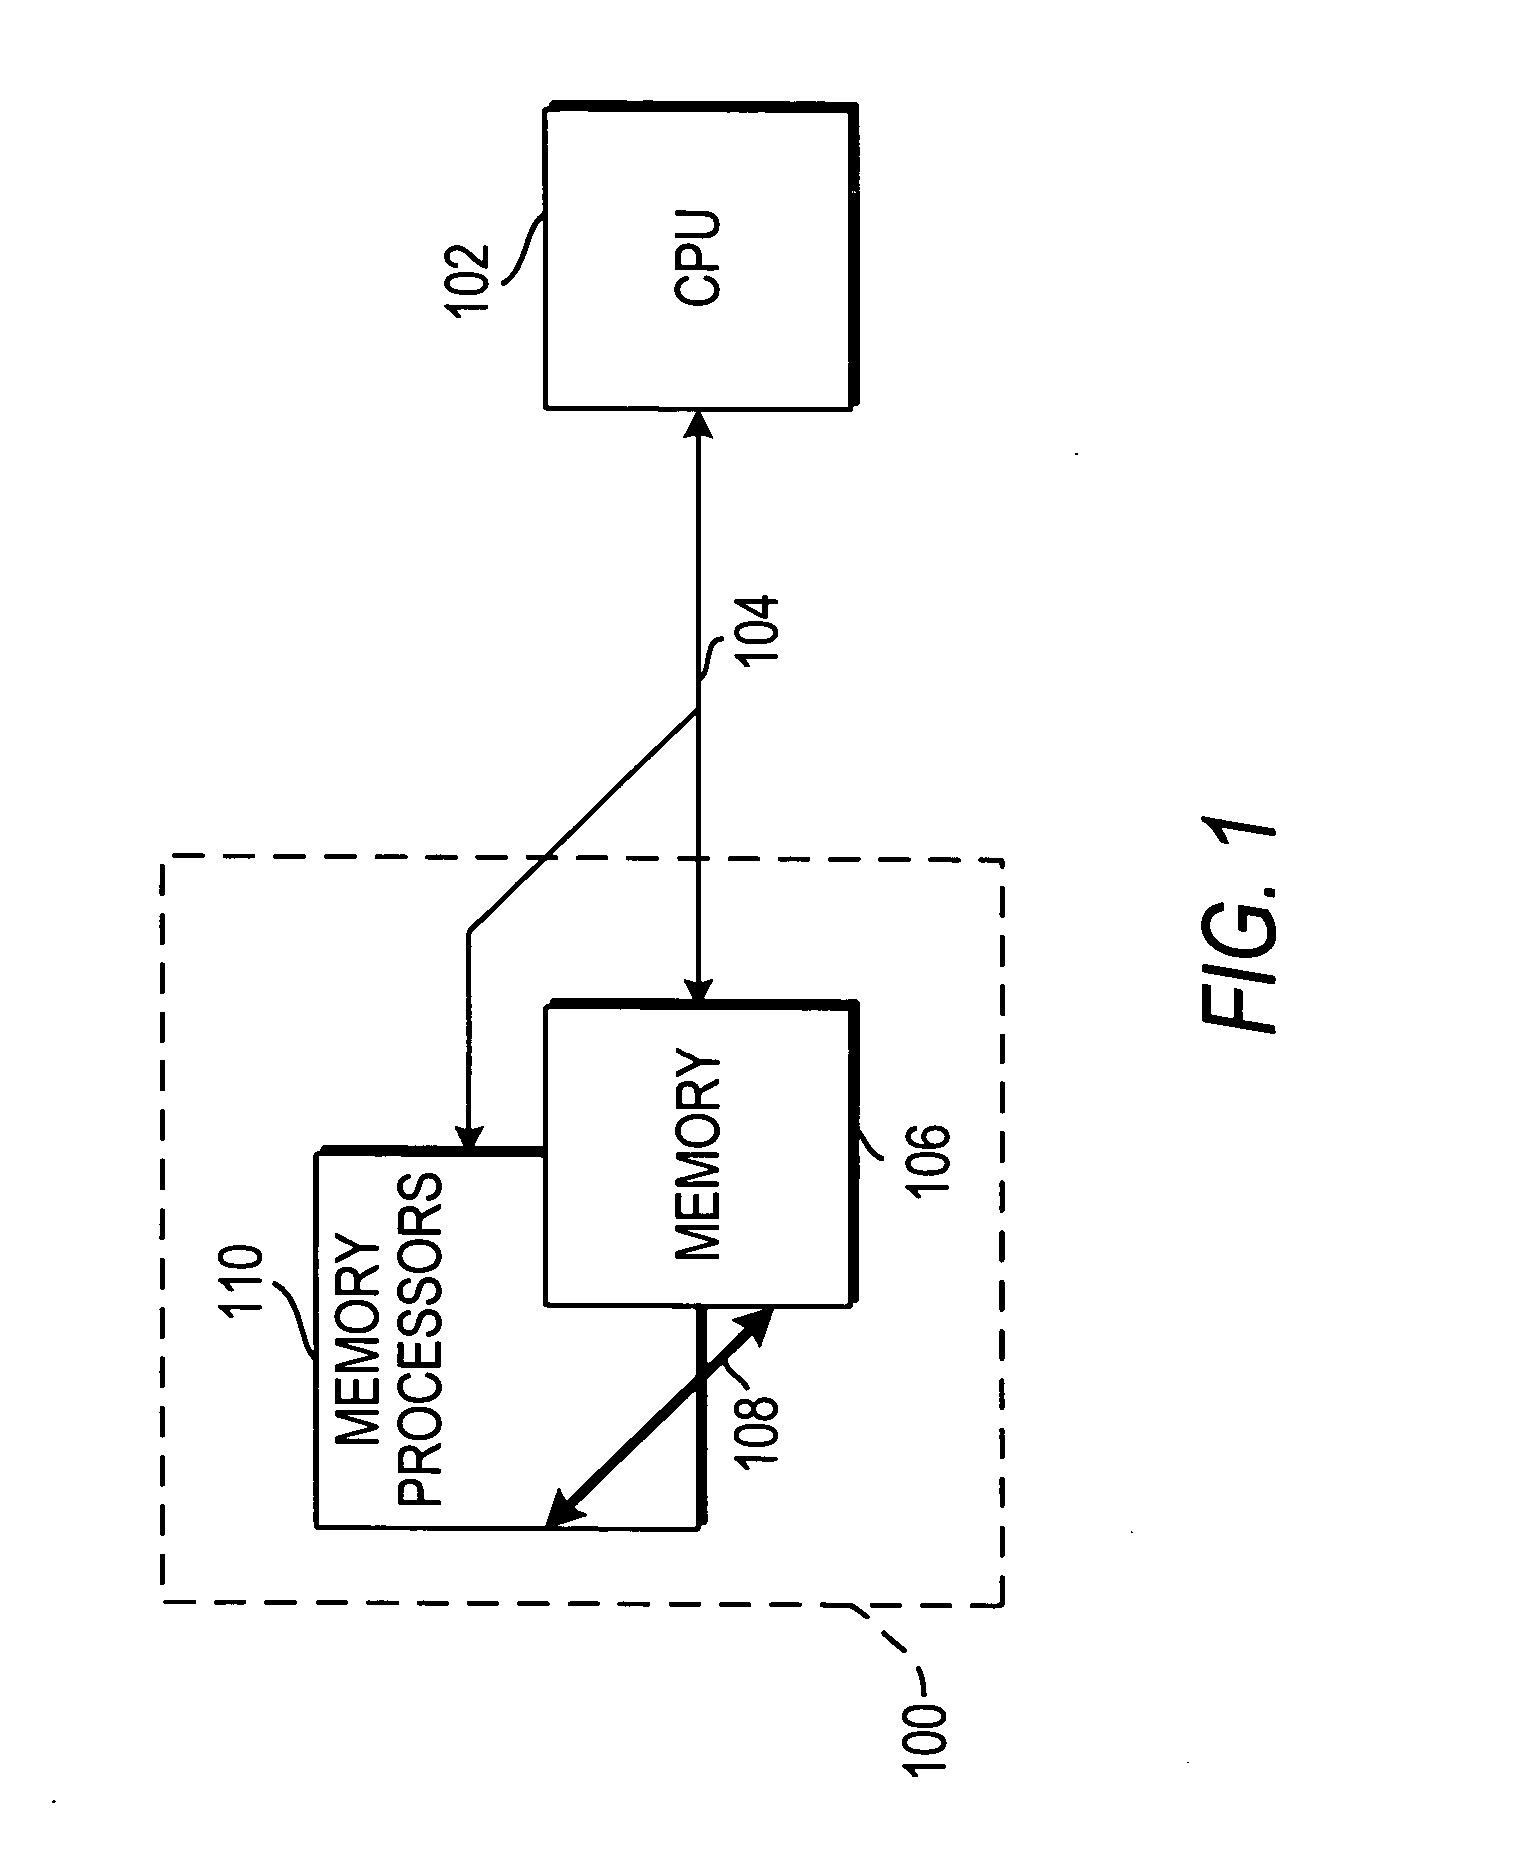 Providing a register file memory with local addressing in a SIMD parallel processor